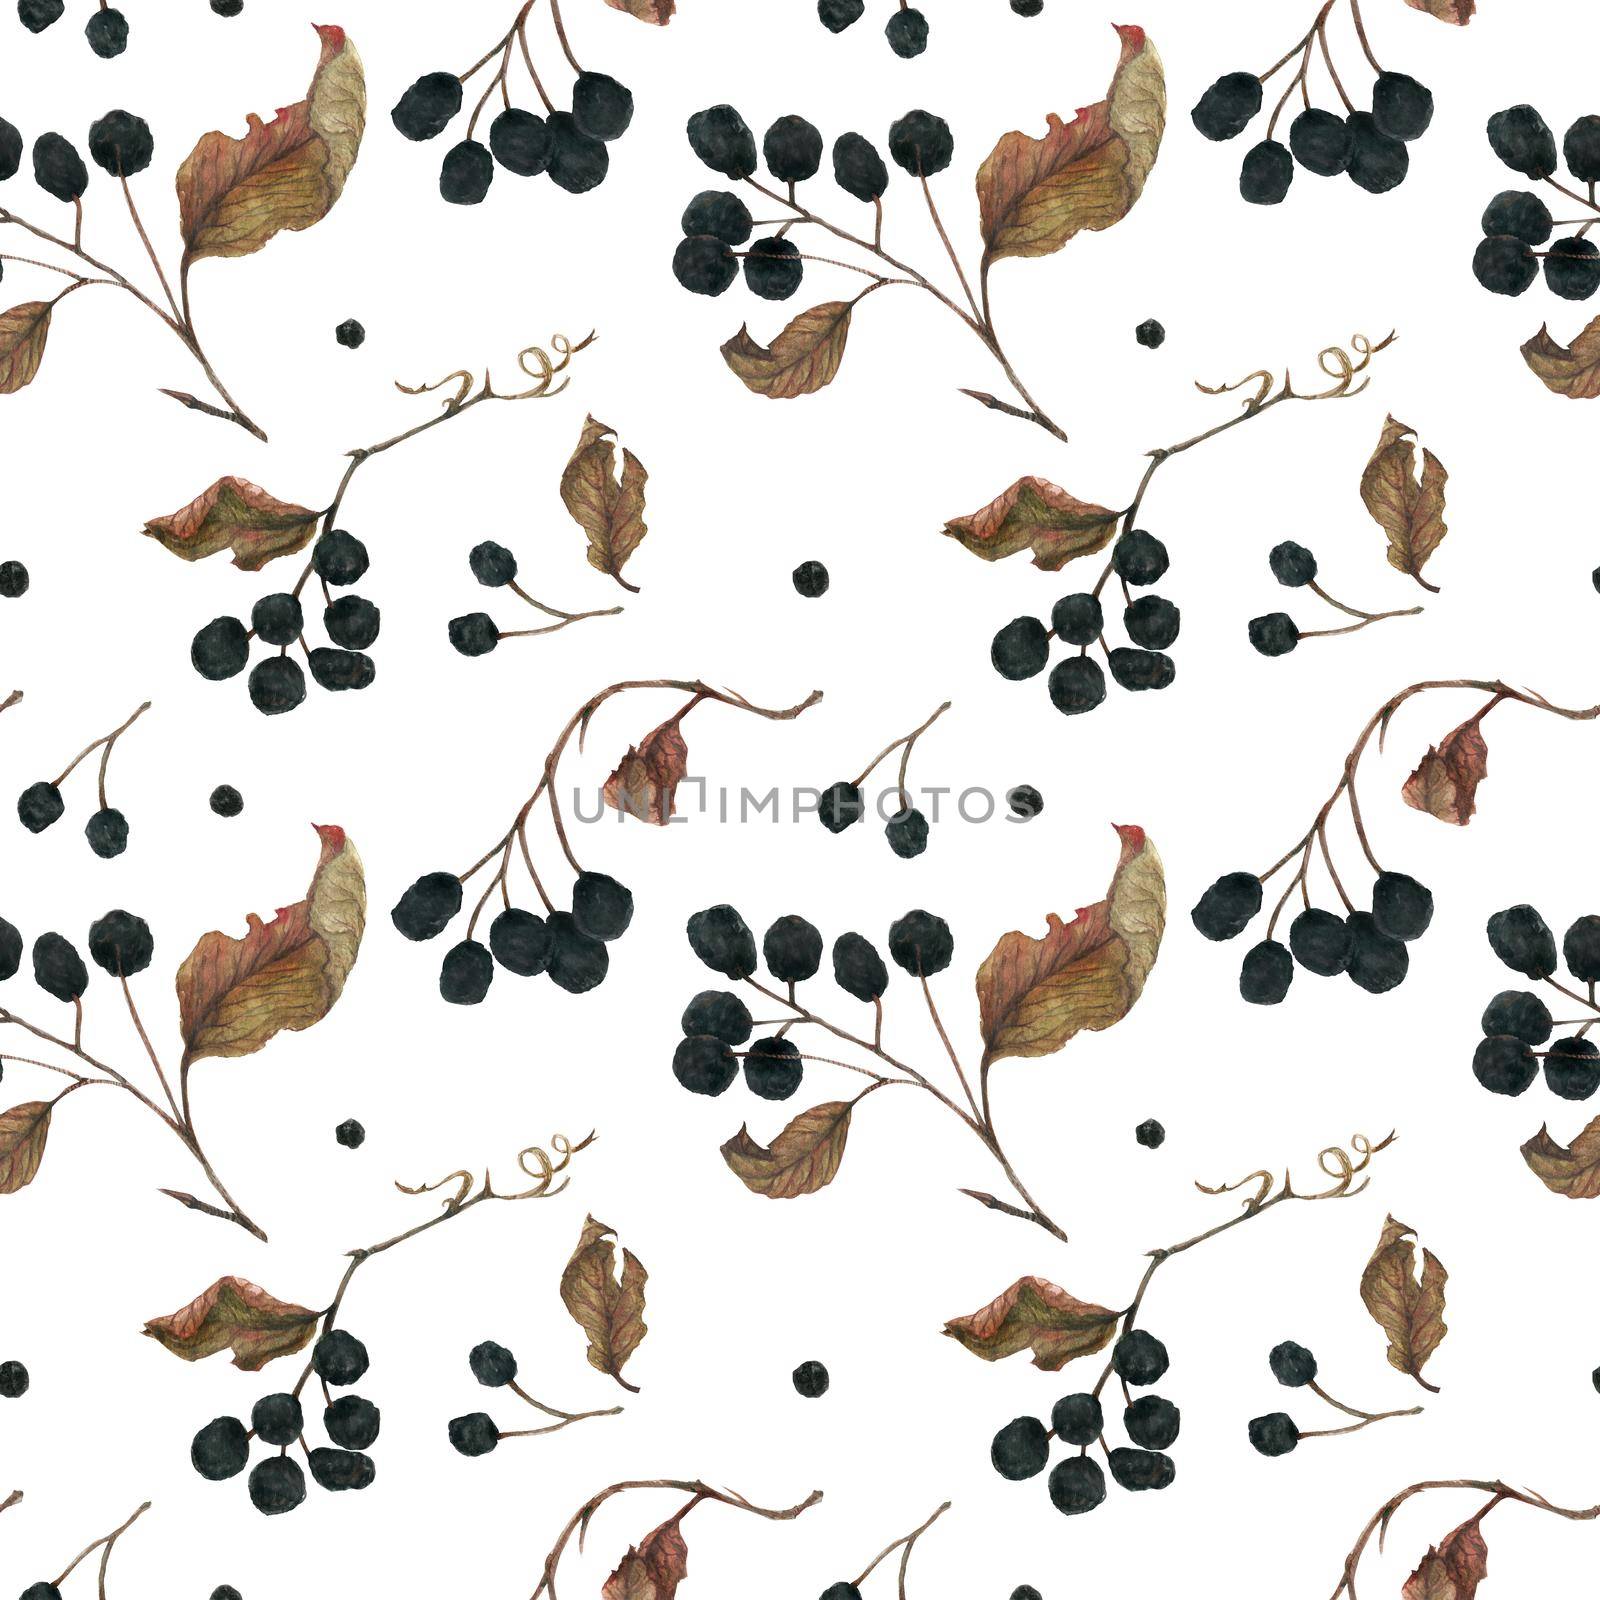 Aronia branches. Dried berries and leaves for Christmas pattern by Xeniasnowstorm